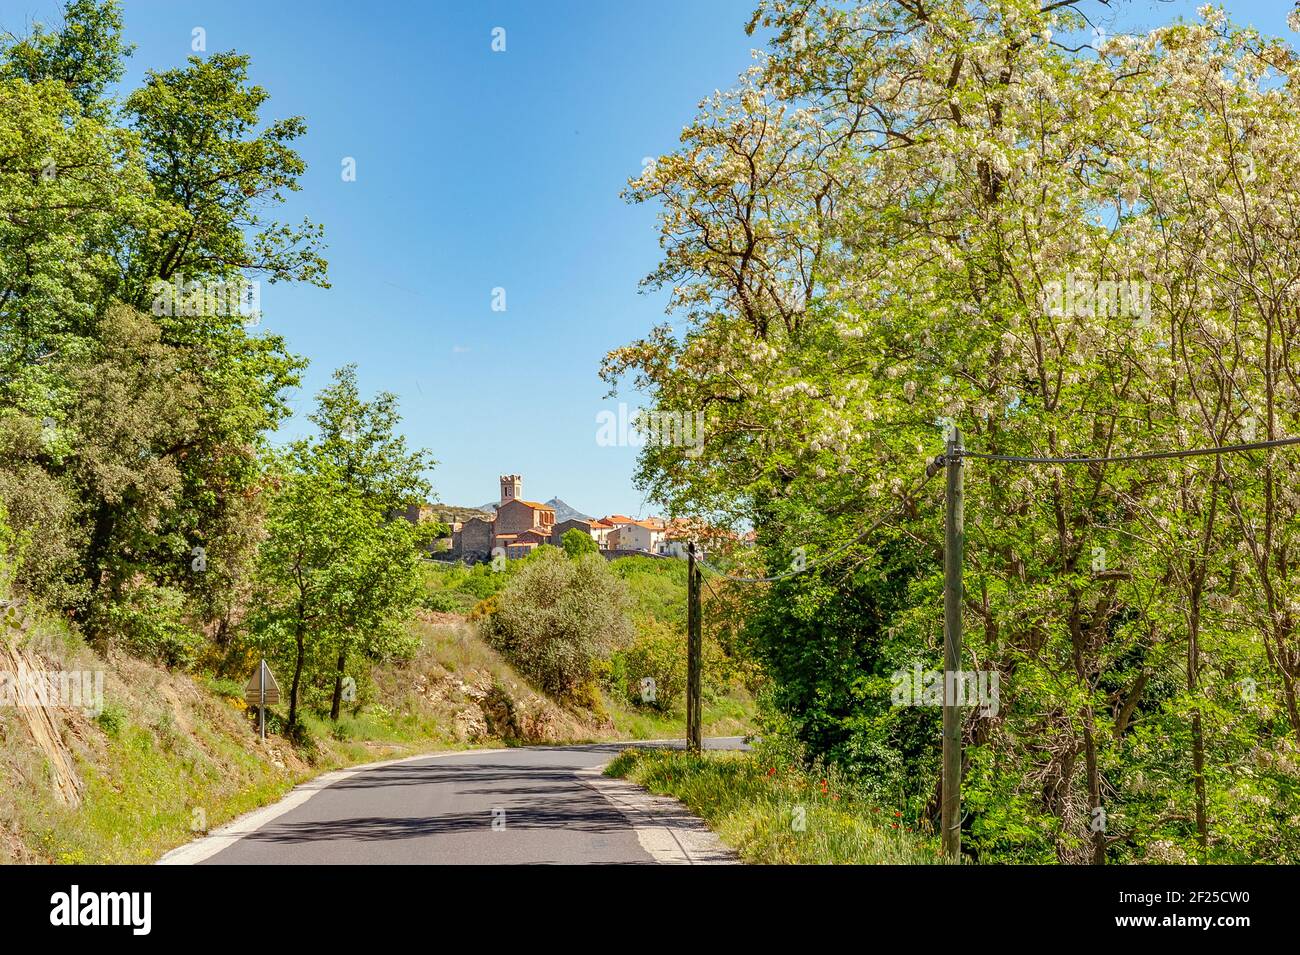 The village of Latour-de-France in southern France Stock Photo